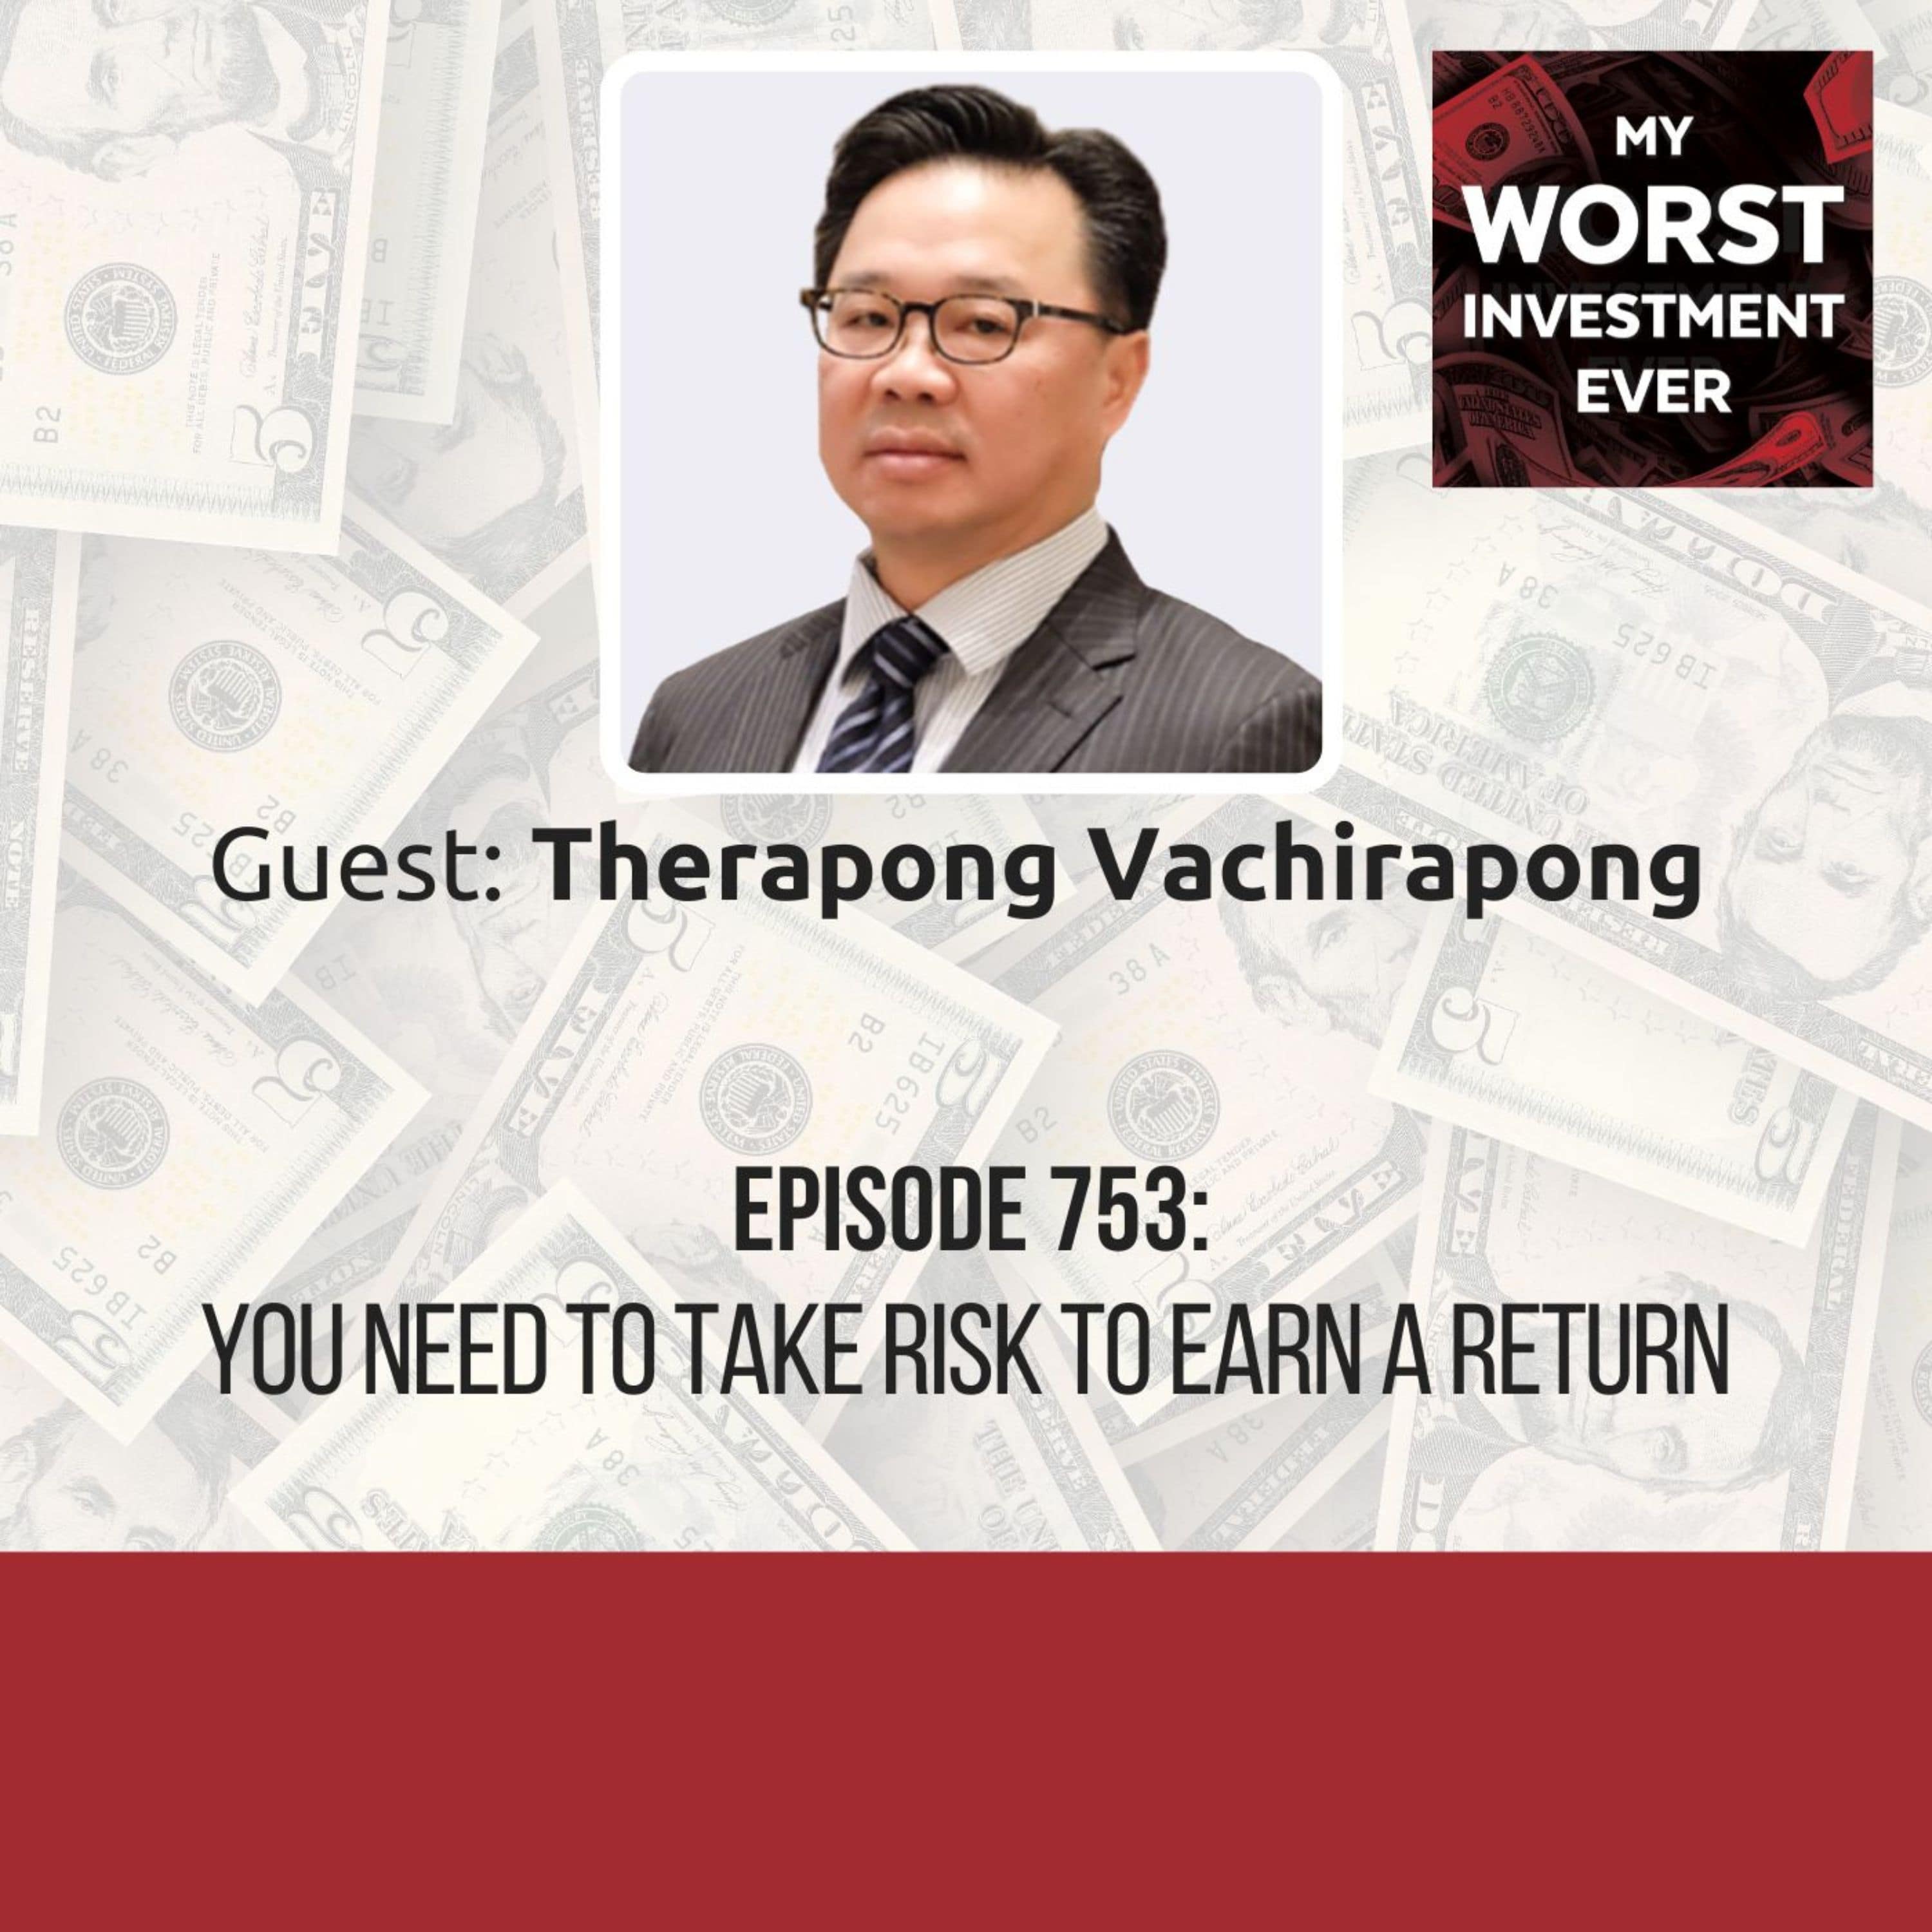 Therapong Vachirapong – You Need to Take Risk to Earn a Return